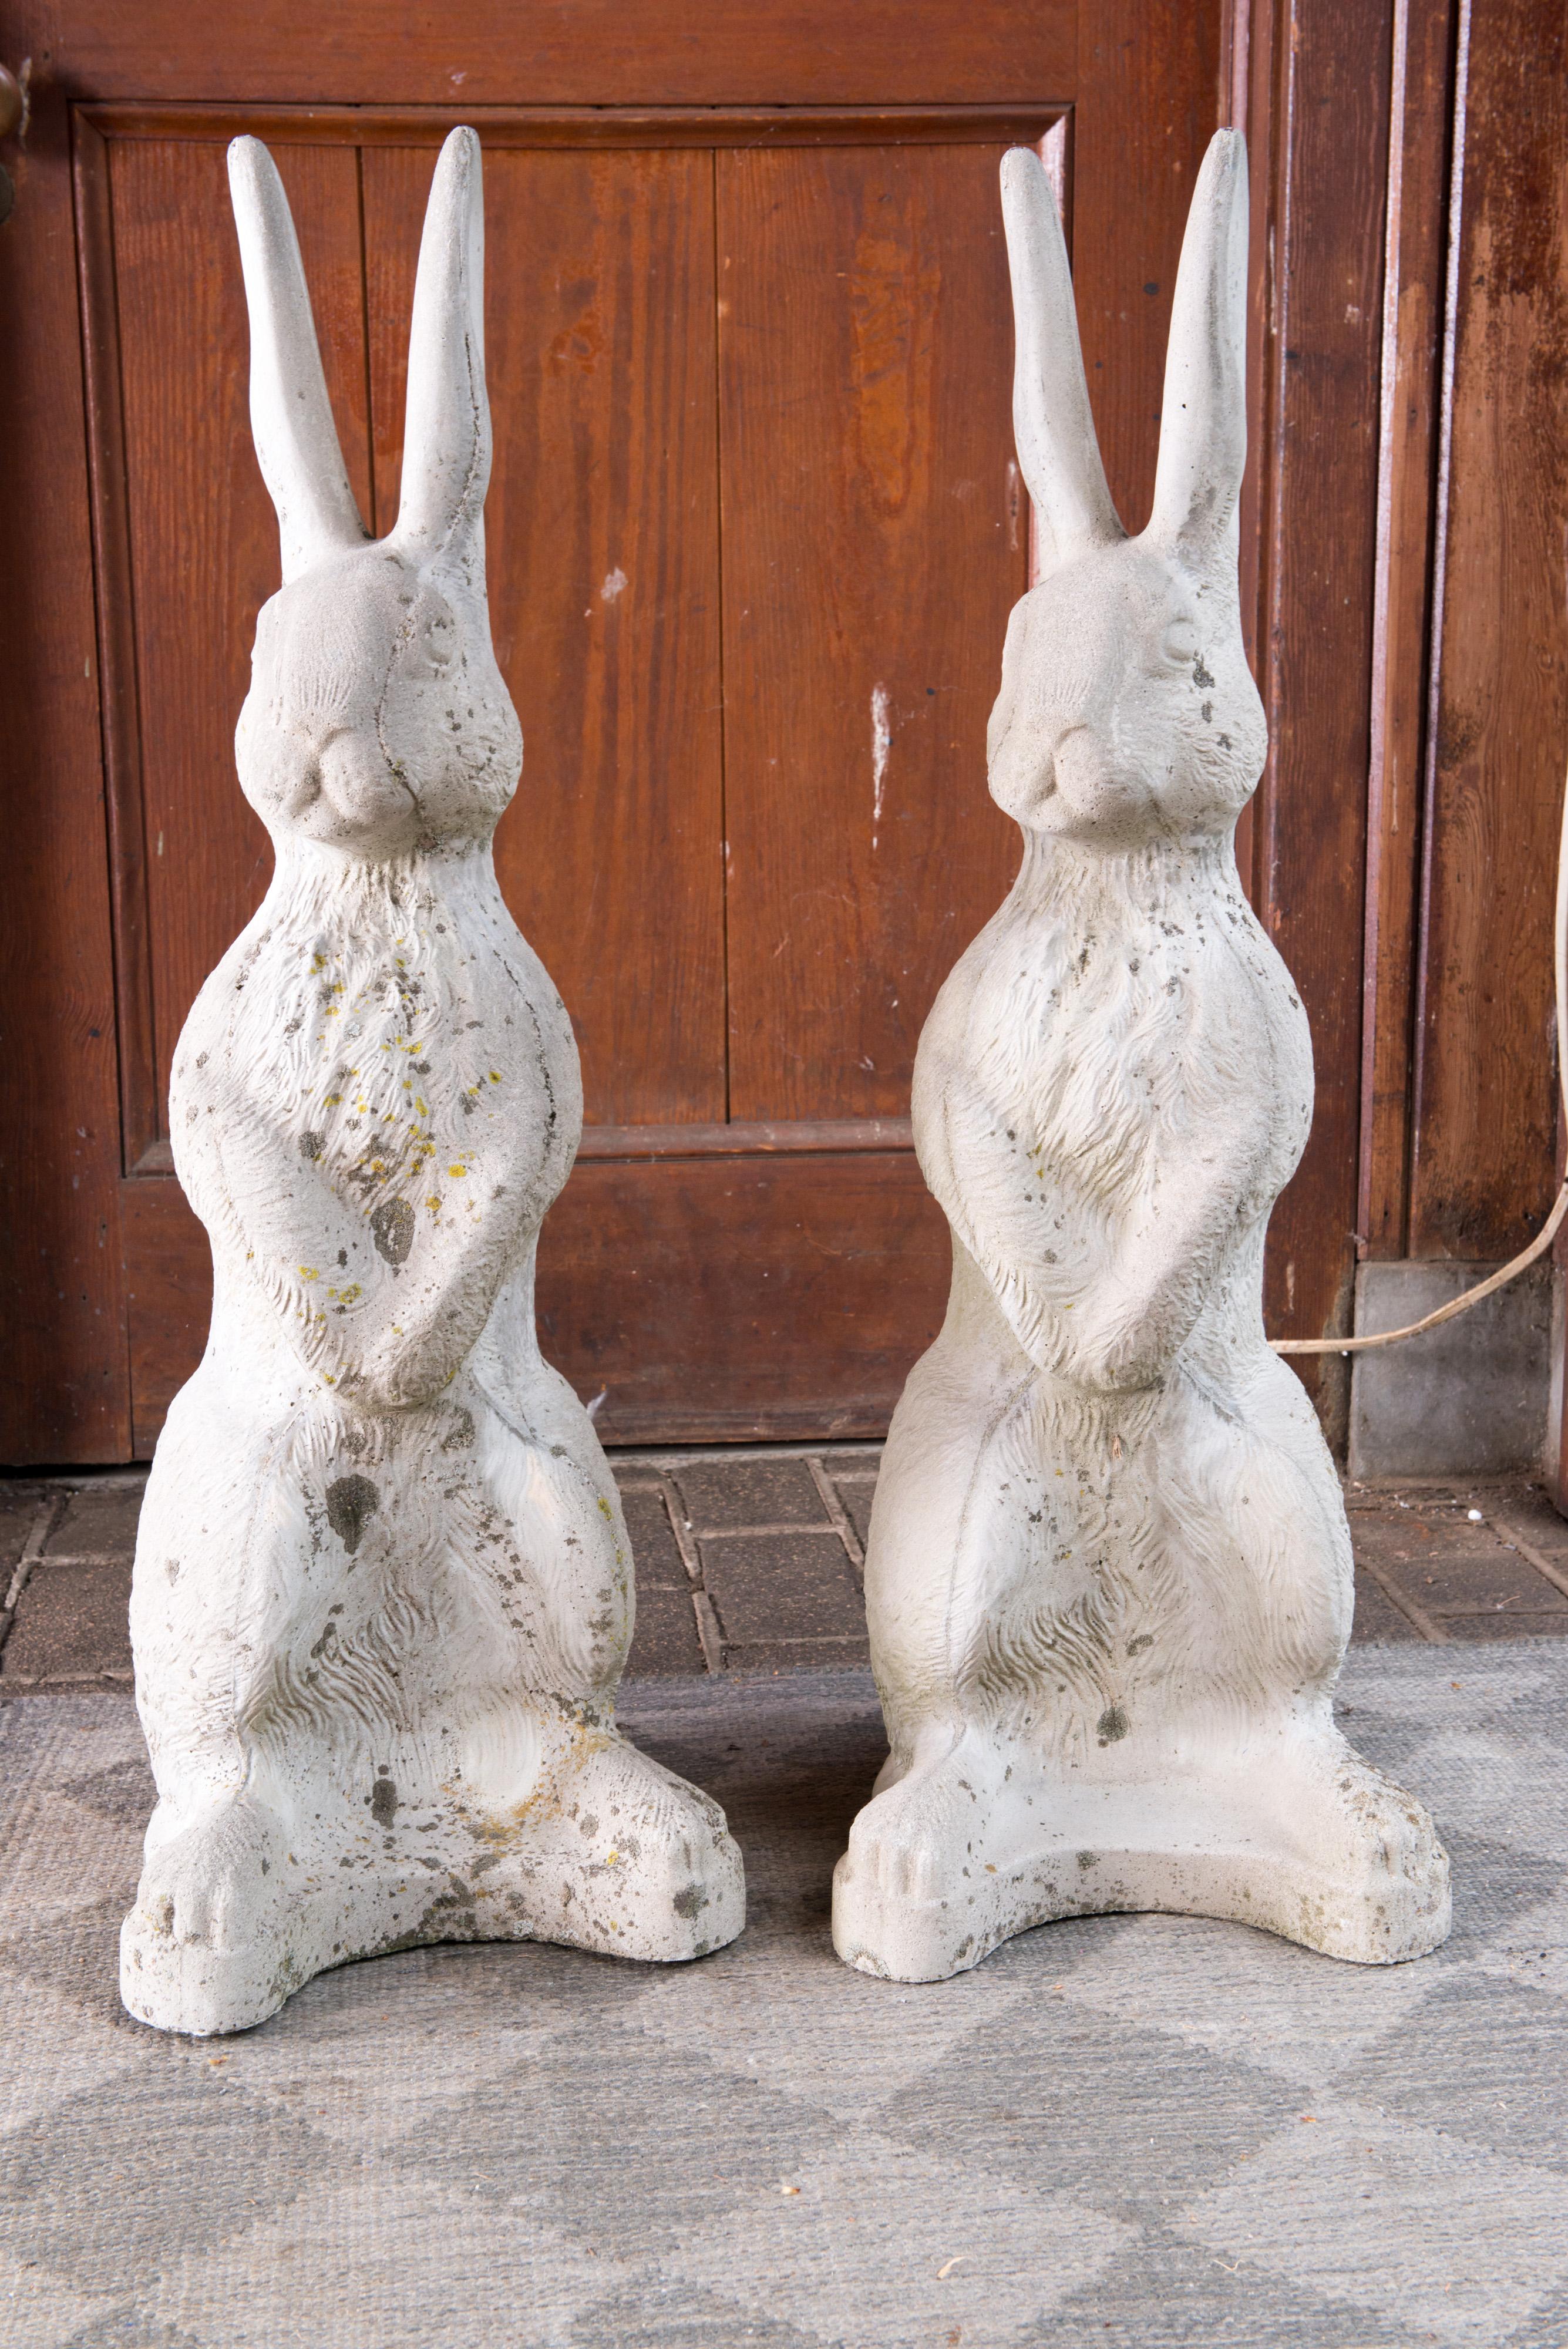 A pair of audacious rabbits ready to reign over your garden!